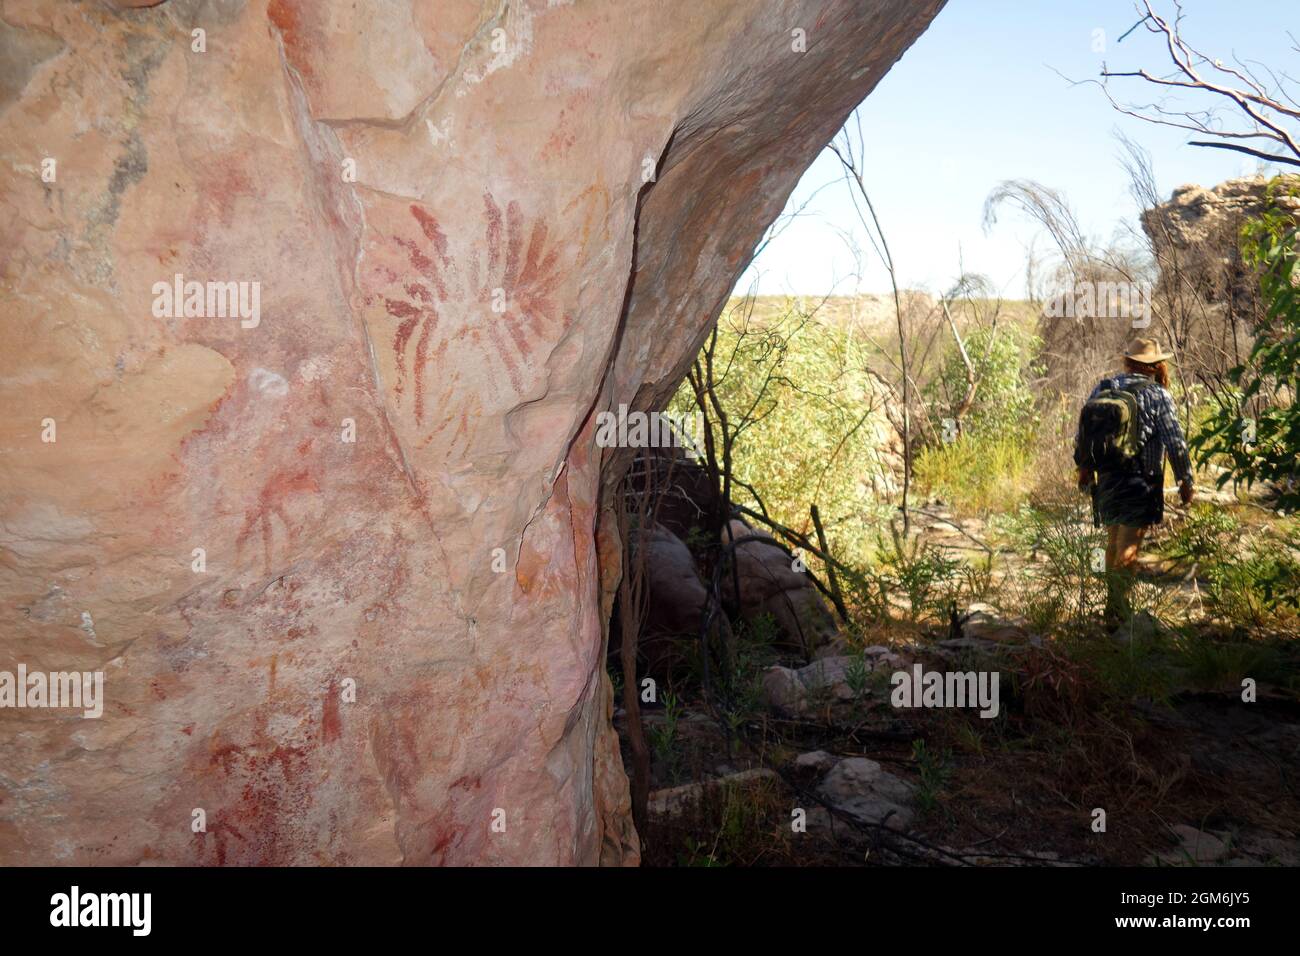 Ancient aboriginal cave paintings at the Valley of the Ghosts, Lorella Springs Station, east Arnhem Land, Northern Territory, Australia. No MR or PR Stock Photo